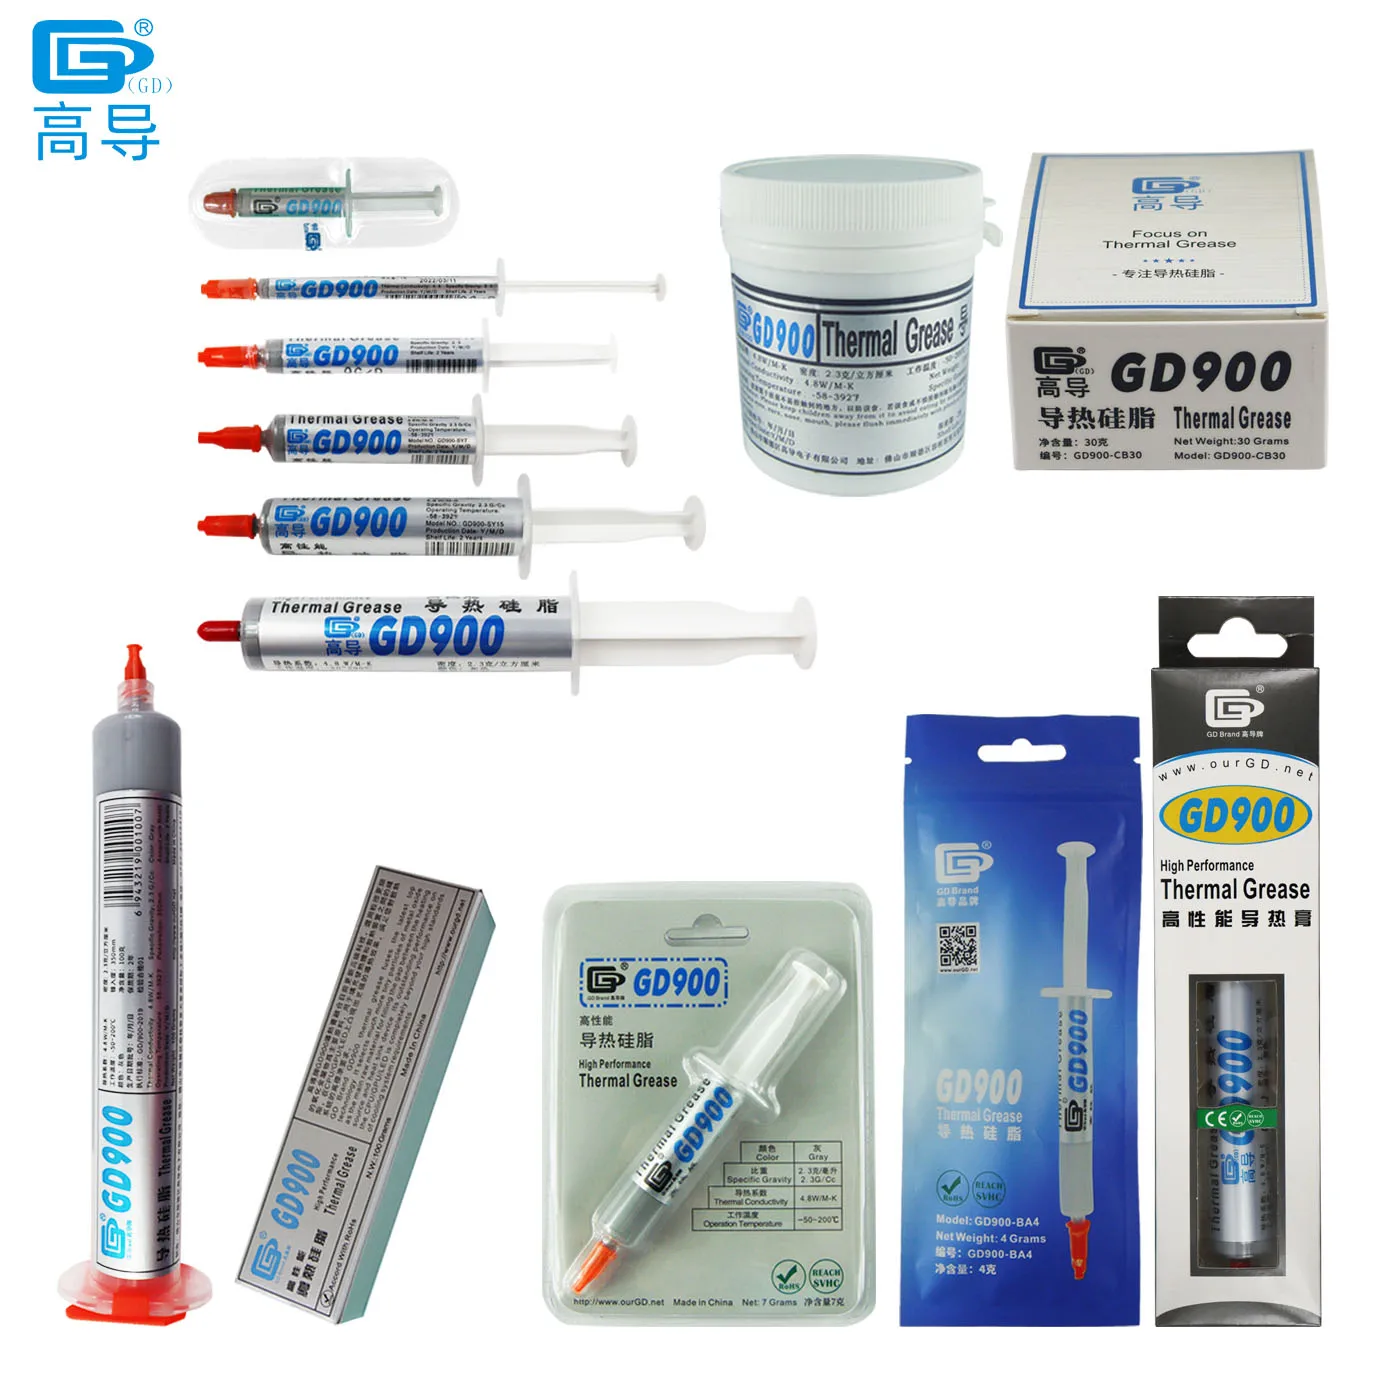 GD900 Thermal Conductive Grease Paste Silicone Plaster Heat Sink Compound High Performance Gray SSY1 SY1 SY3 SY7 SY15 SY30|thermal conductive|conductive greasegd900 thermal - AliExpress